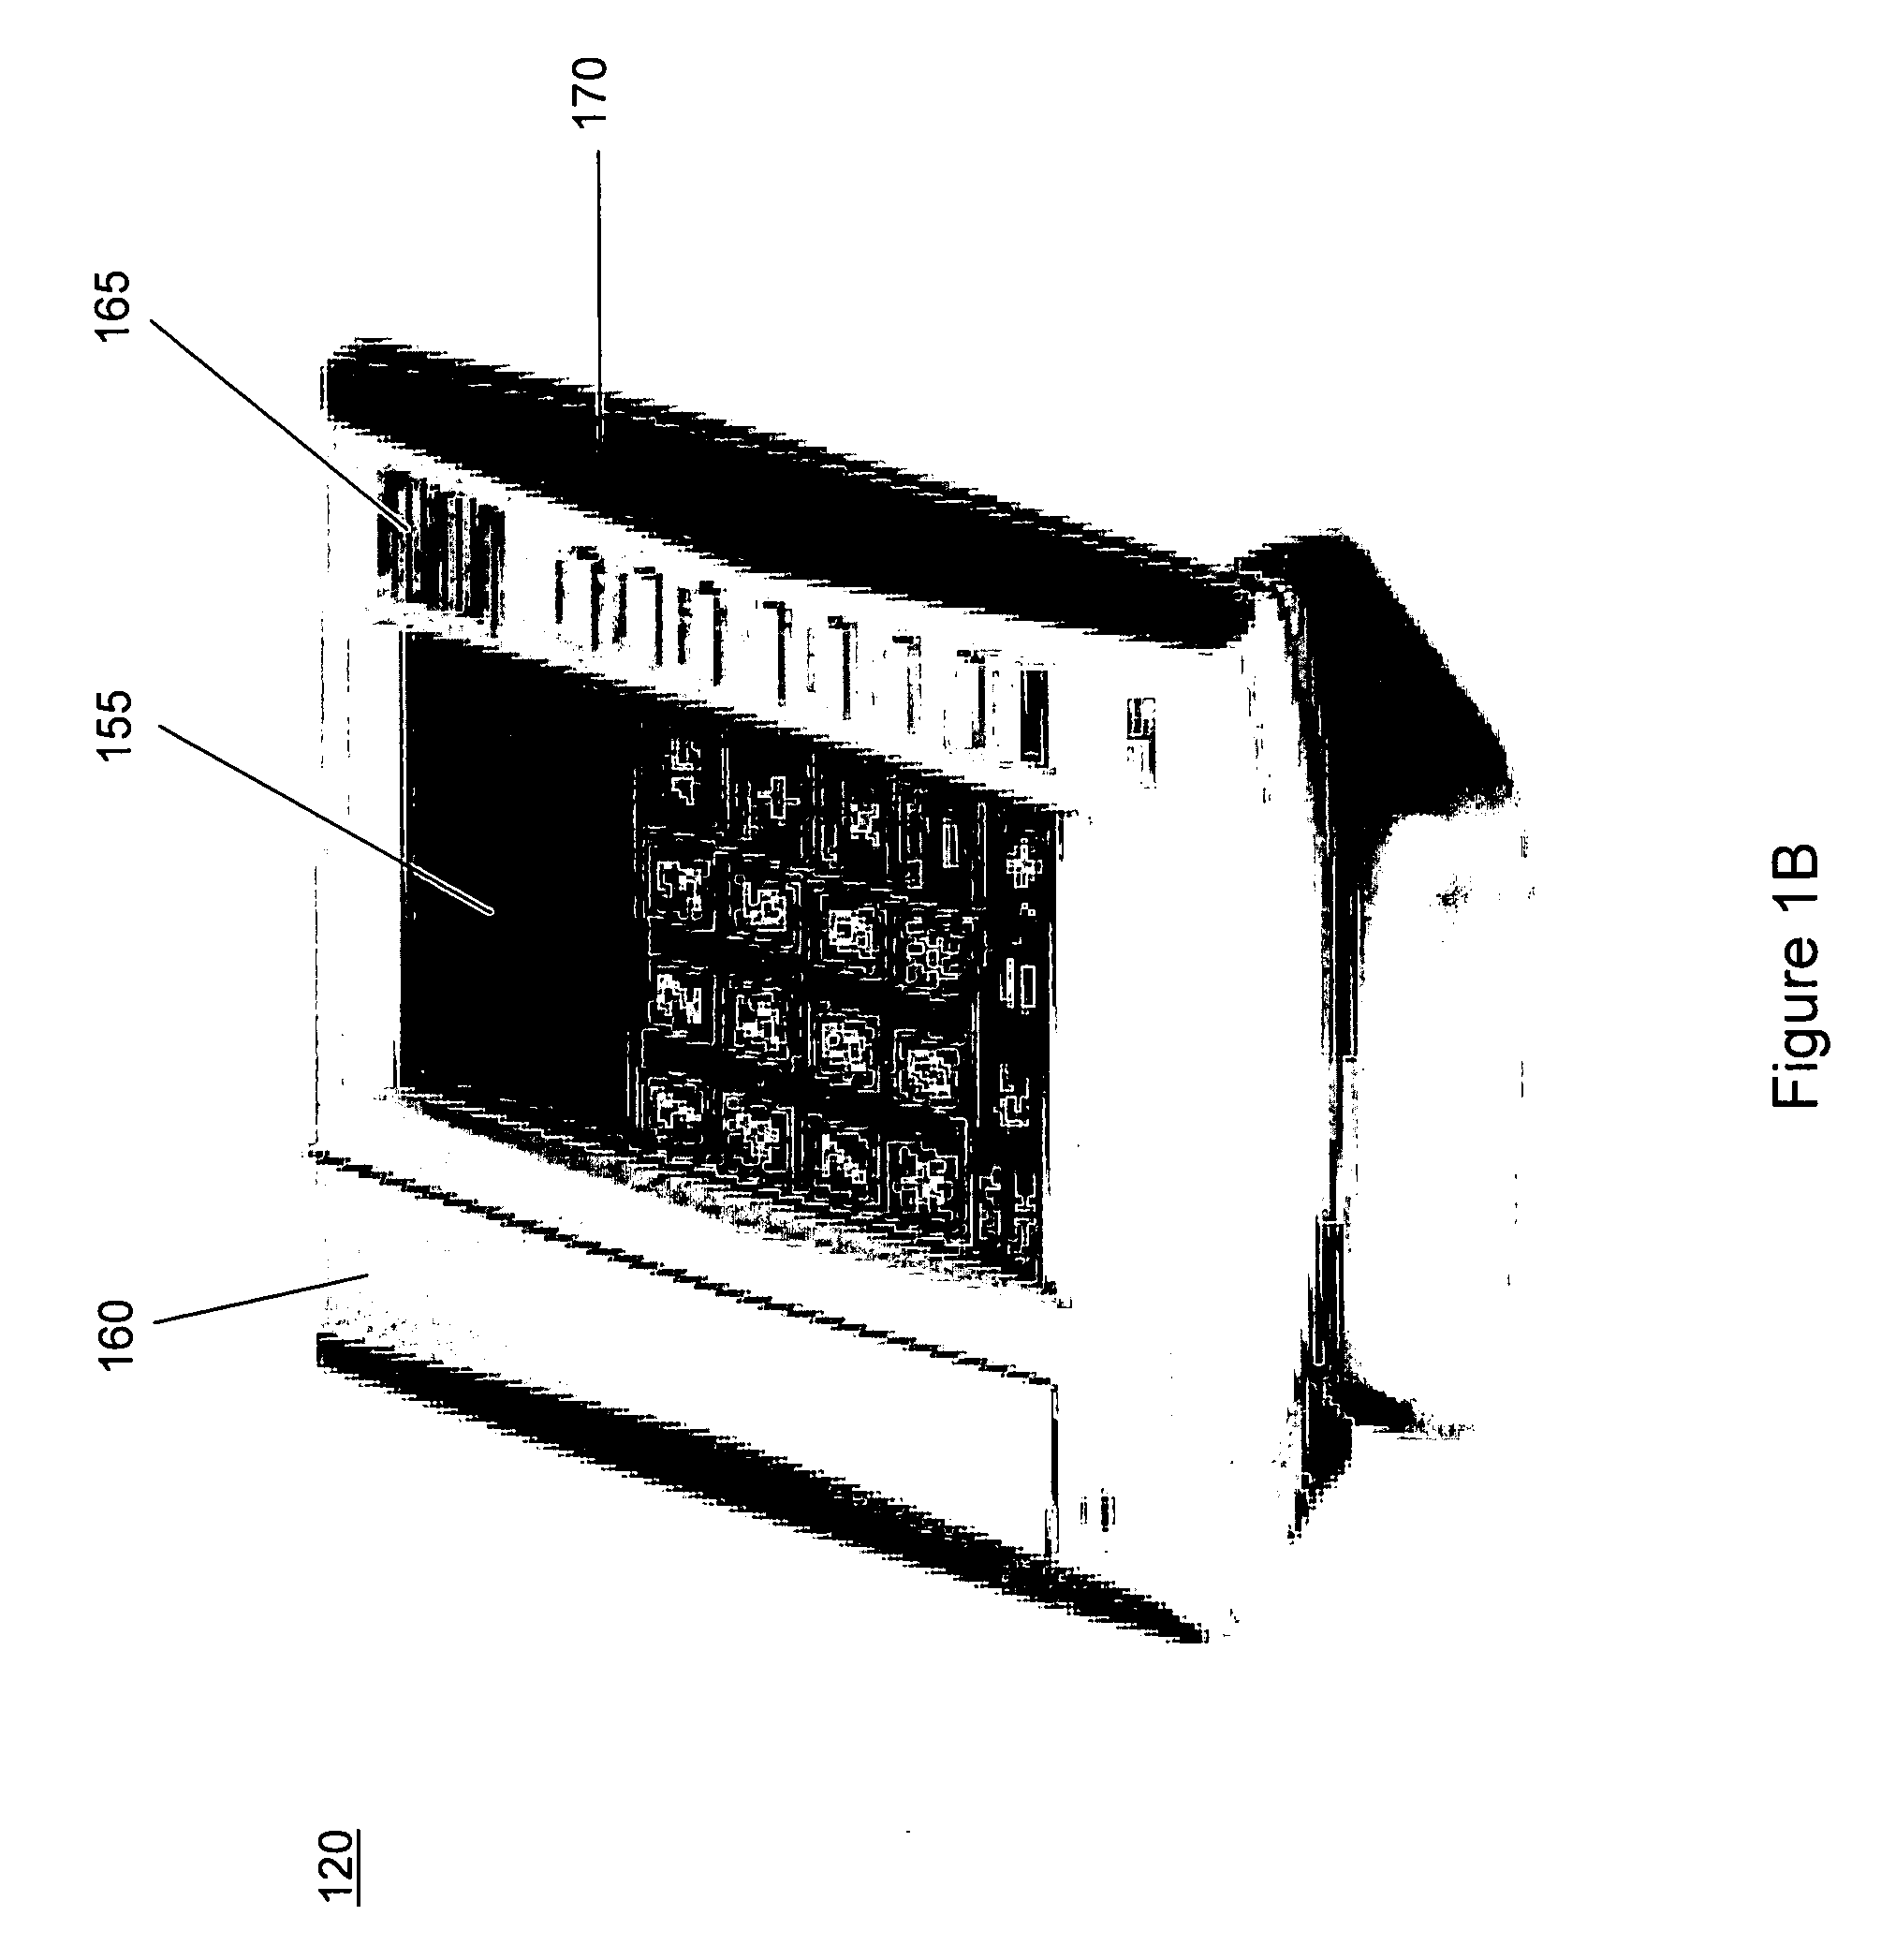 System and method of interacting with hotel information and services